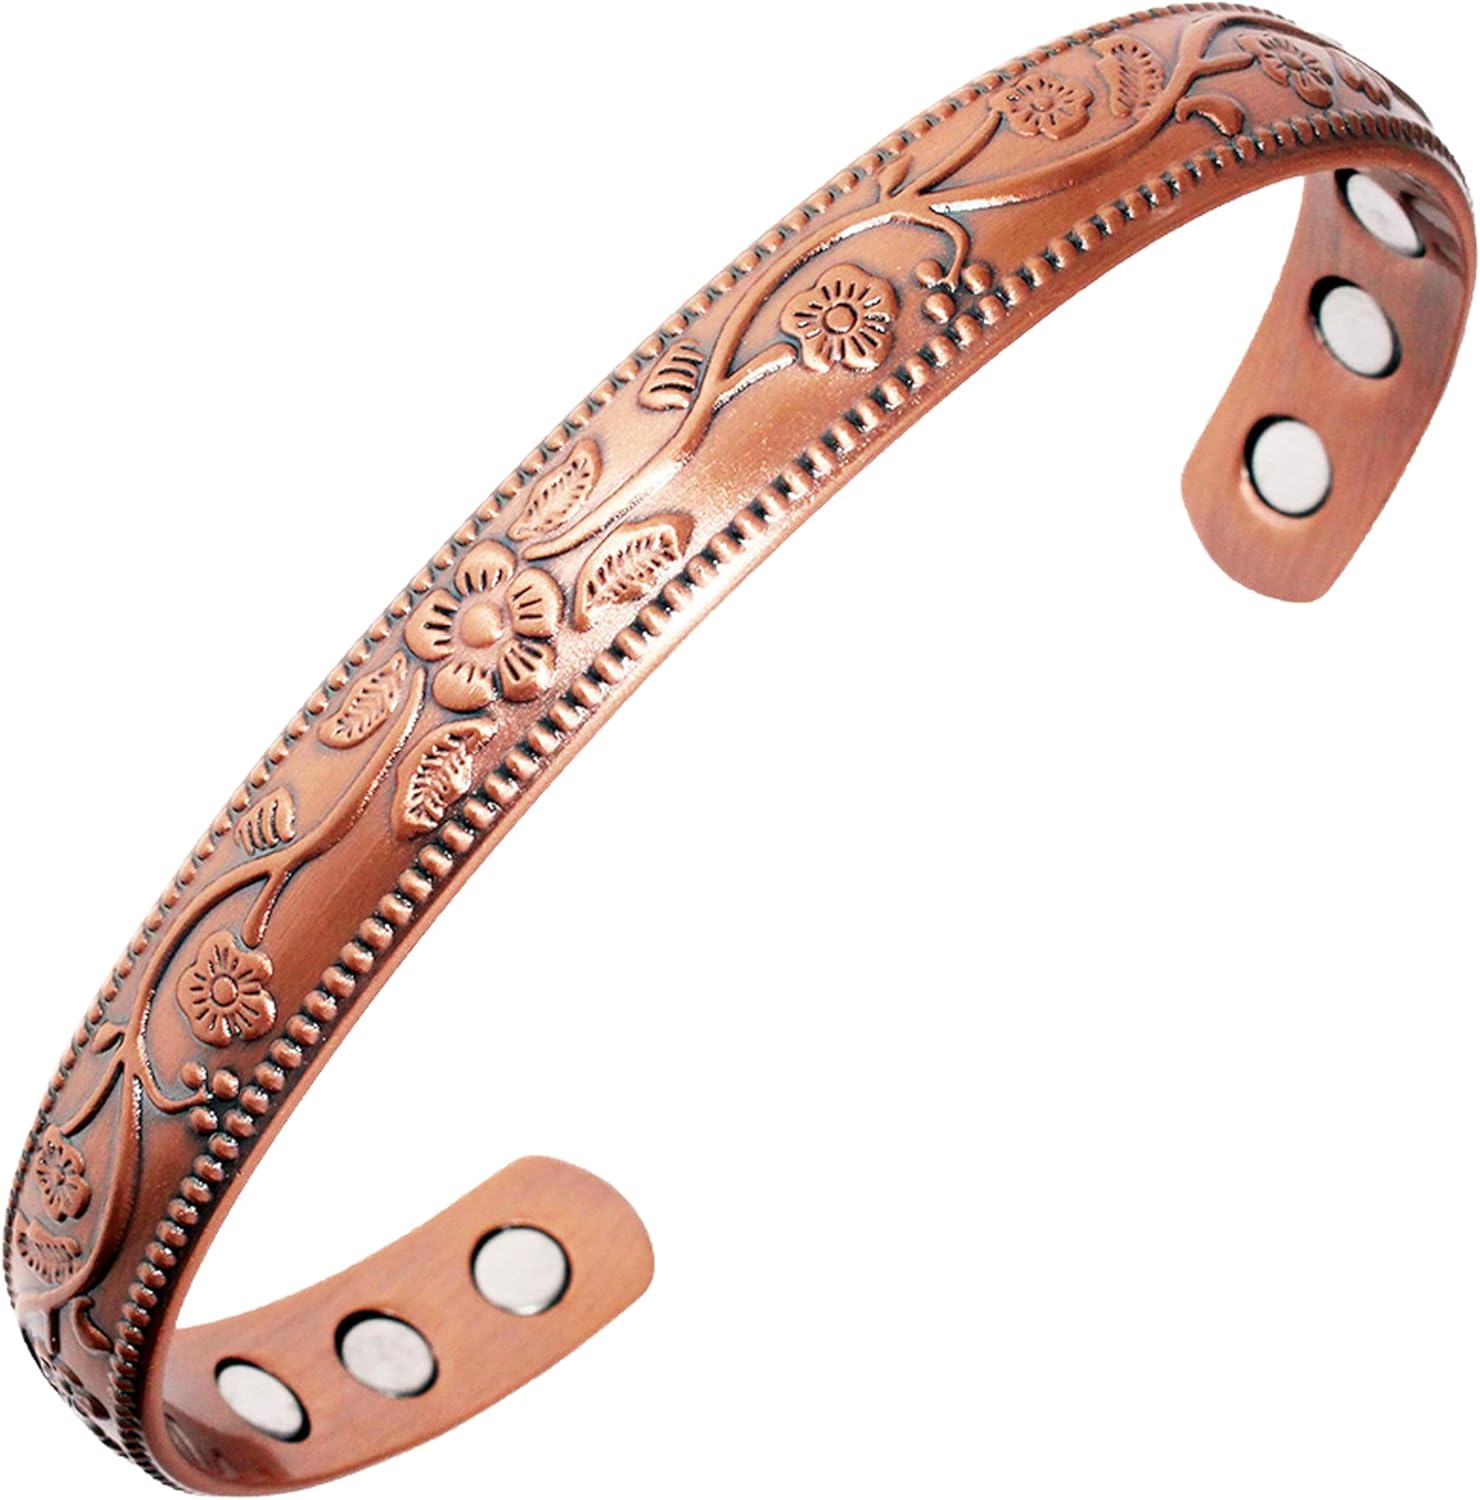 Pure Copper Magnetic Therapy Bracelet for Arthritis, Rheumatoid Arthritis, RSI, Migraines and Fatigue